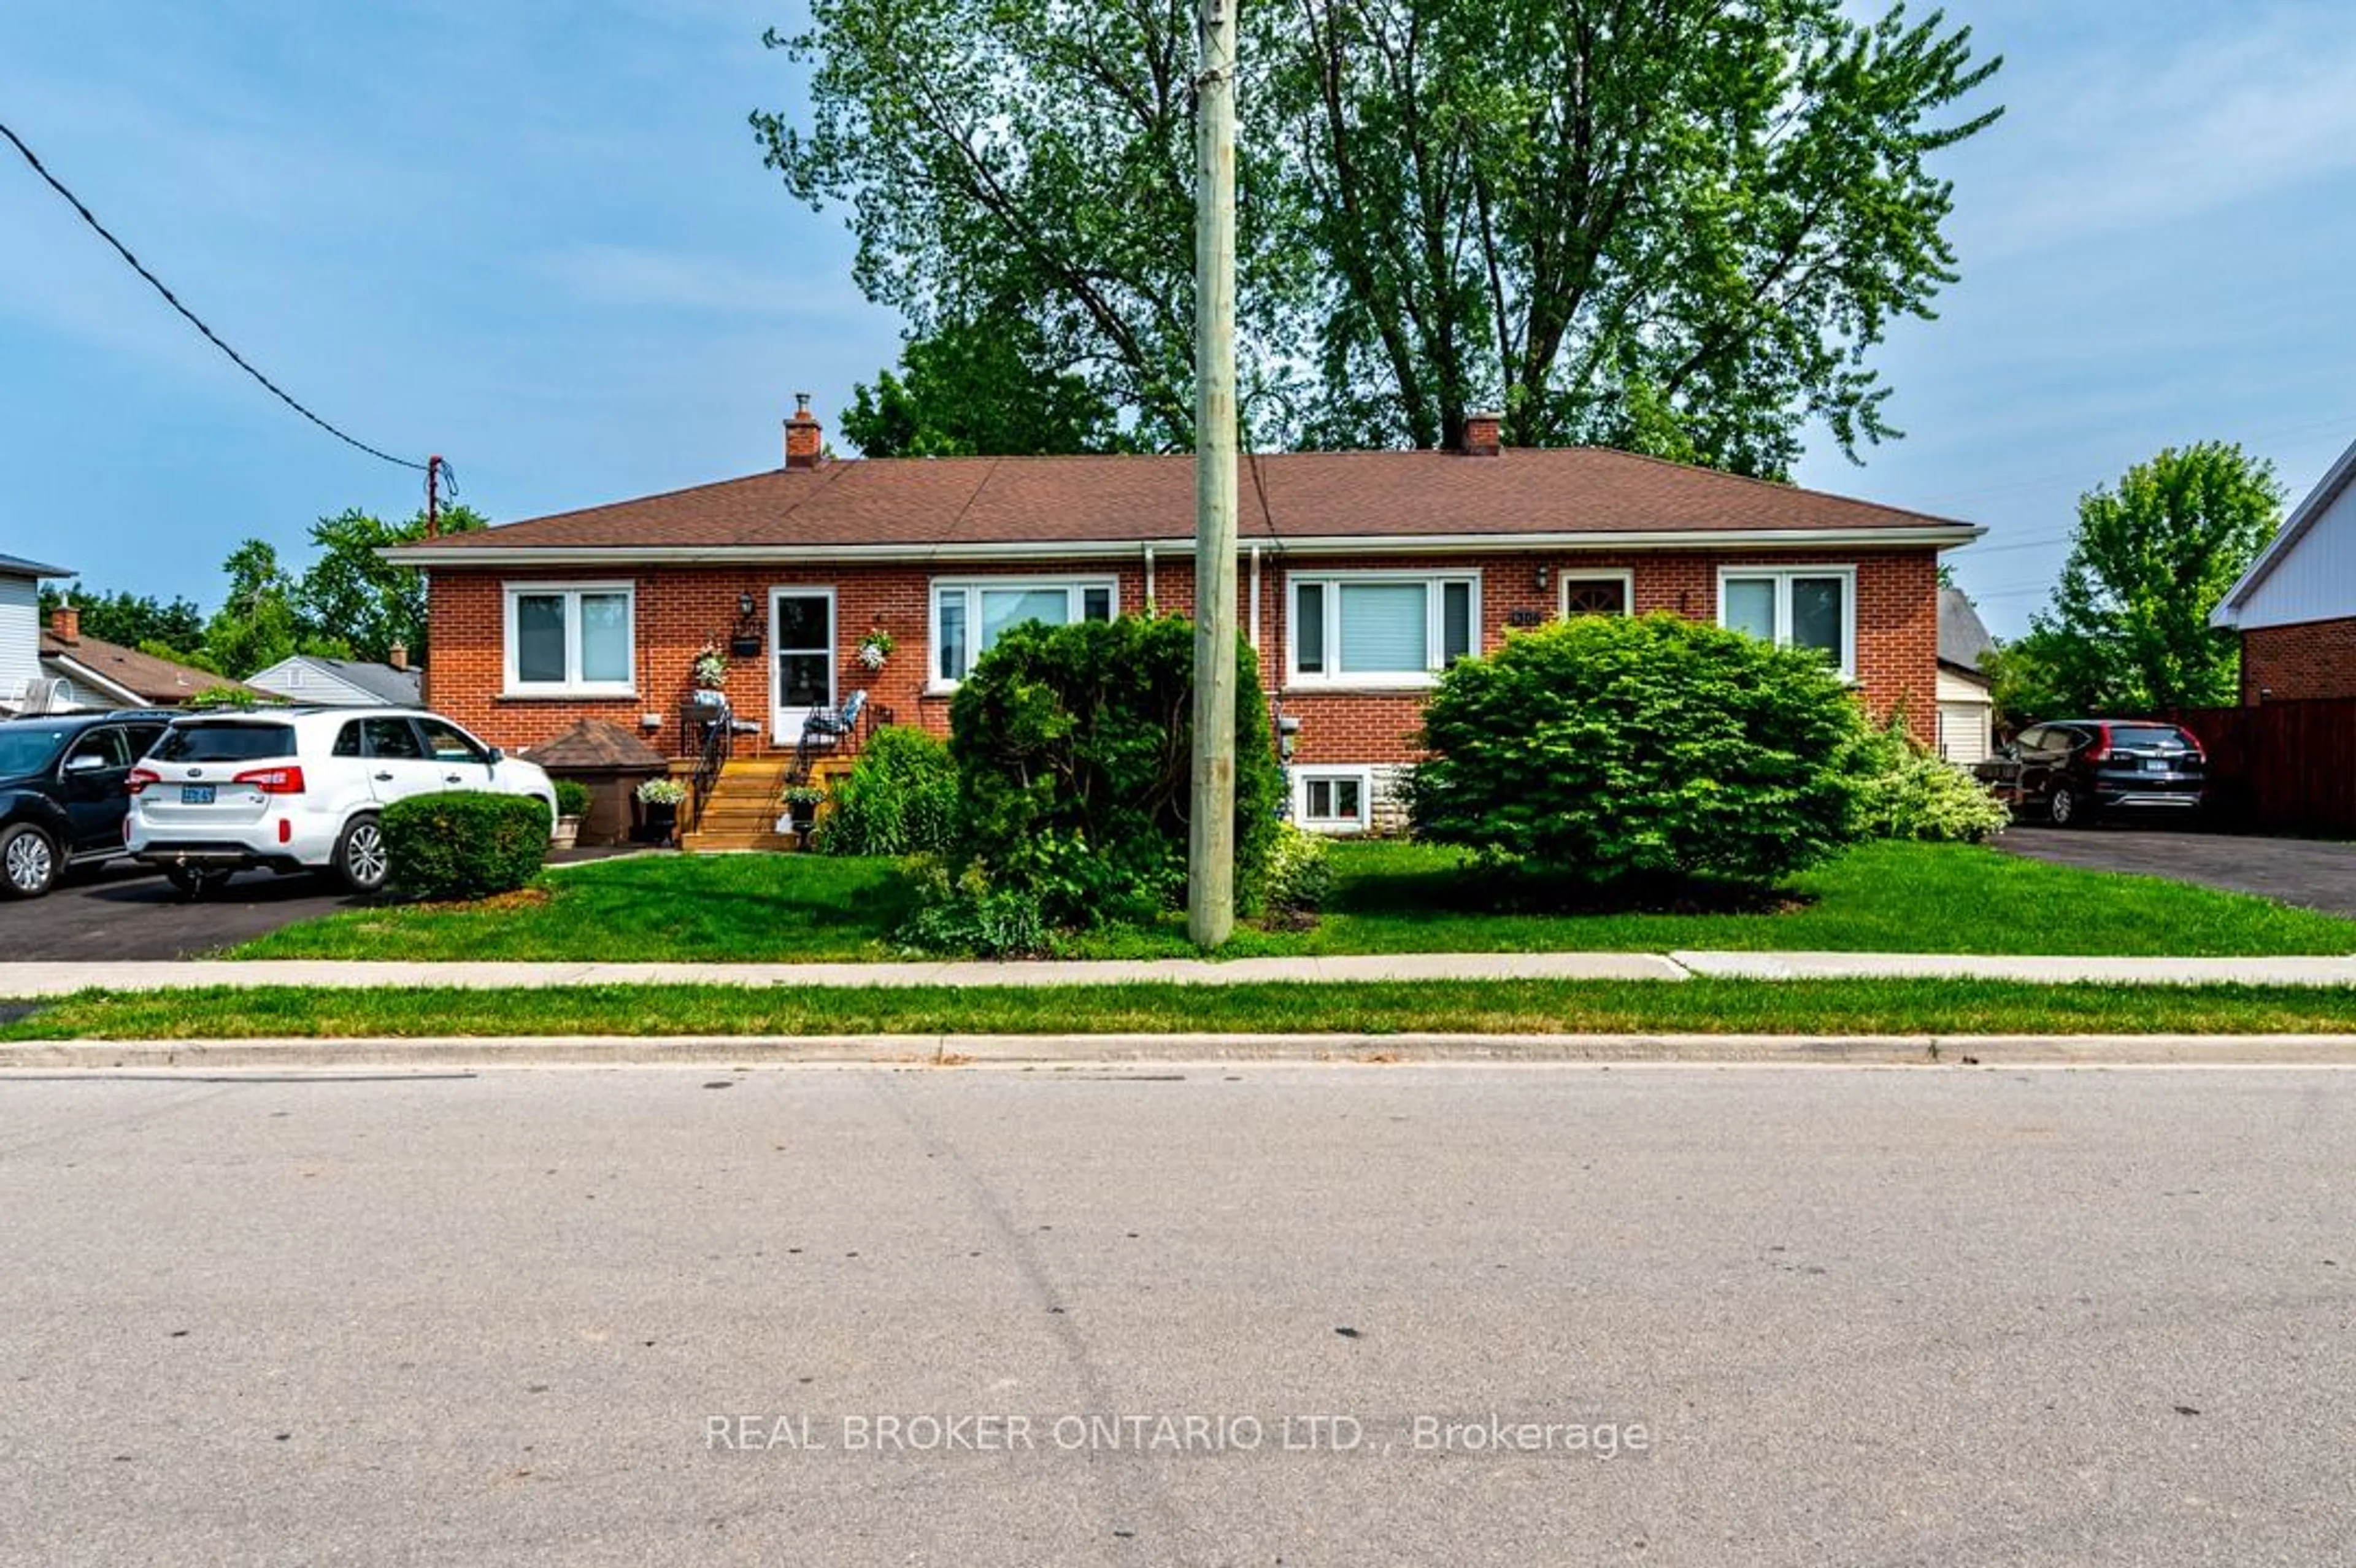 Home with brick exterior material for 1306* Leighland Rd, Burlington Ontario L7R 3S5